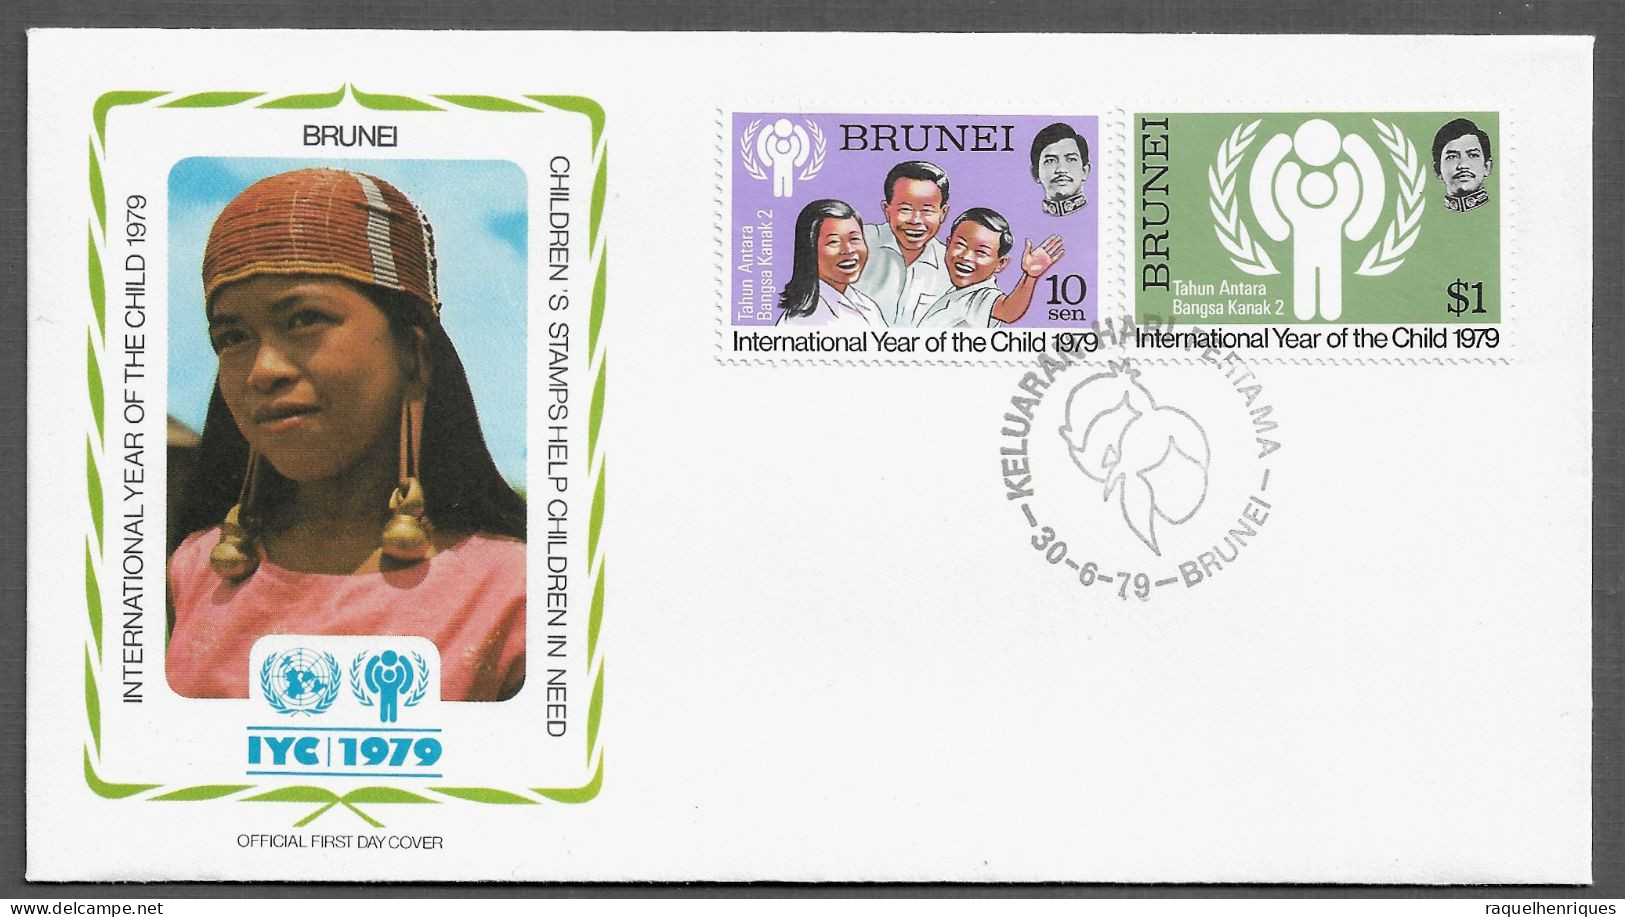 BRUNEI FDC COVER - 1979 International Year Of The Child SET FDC (FDC79#05) - Brunei (1984-...)